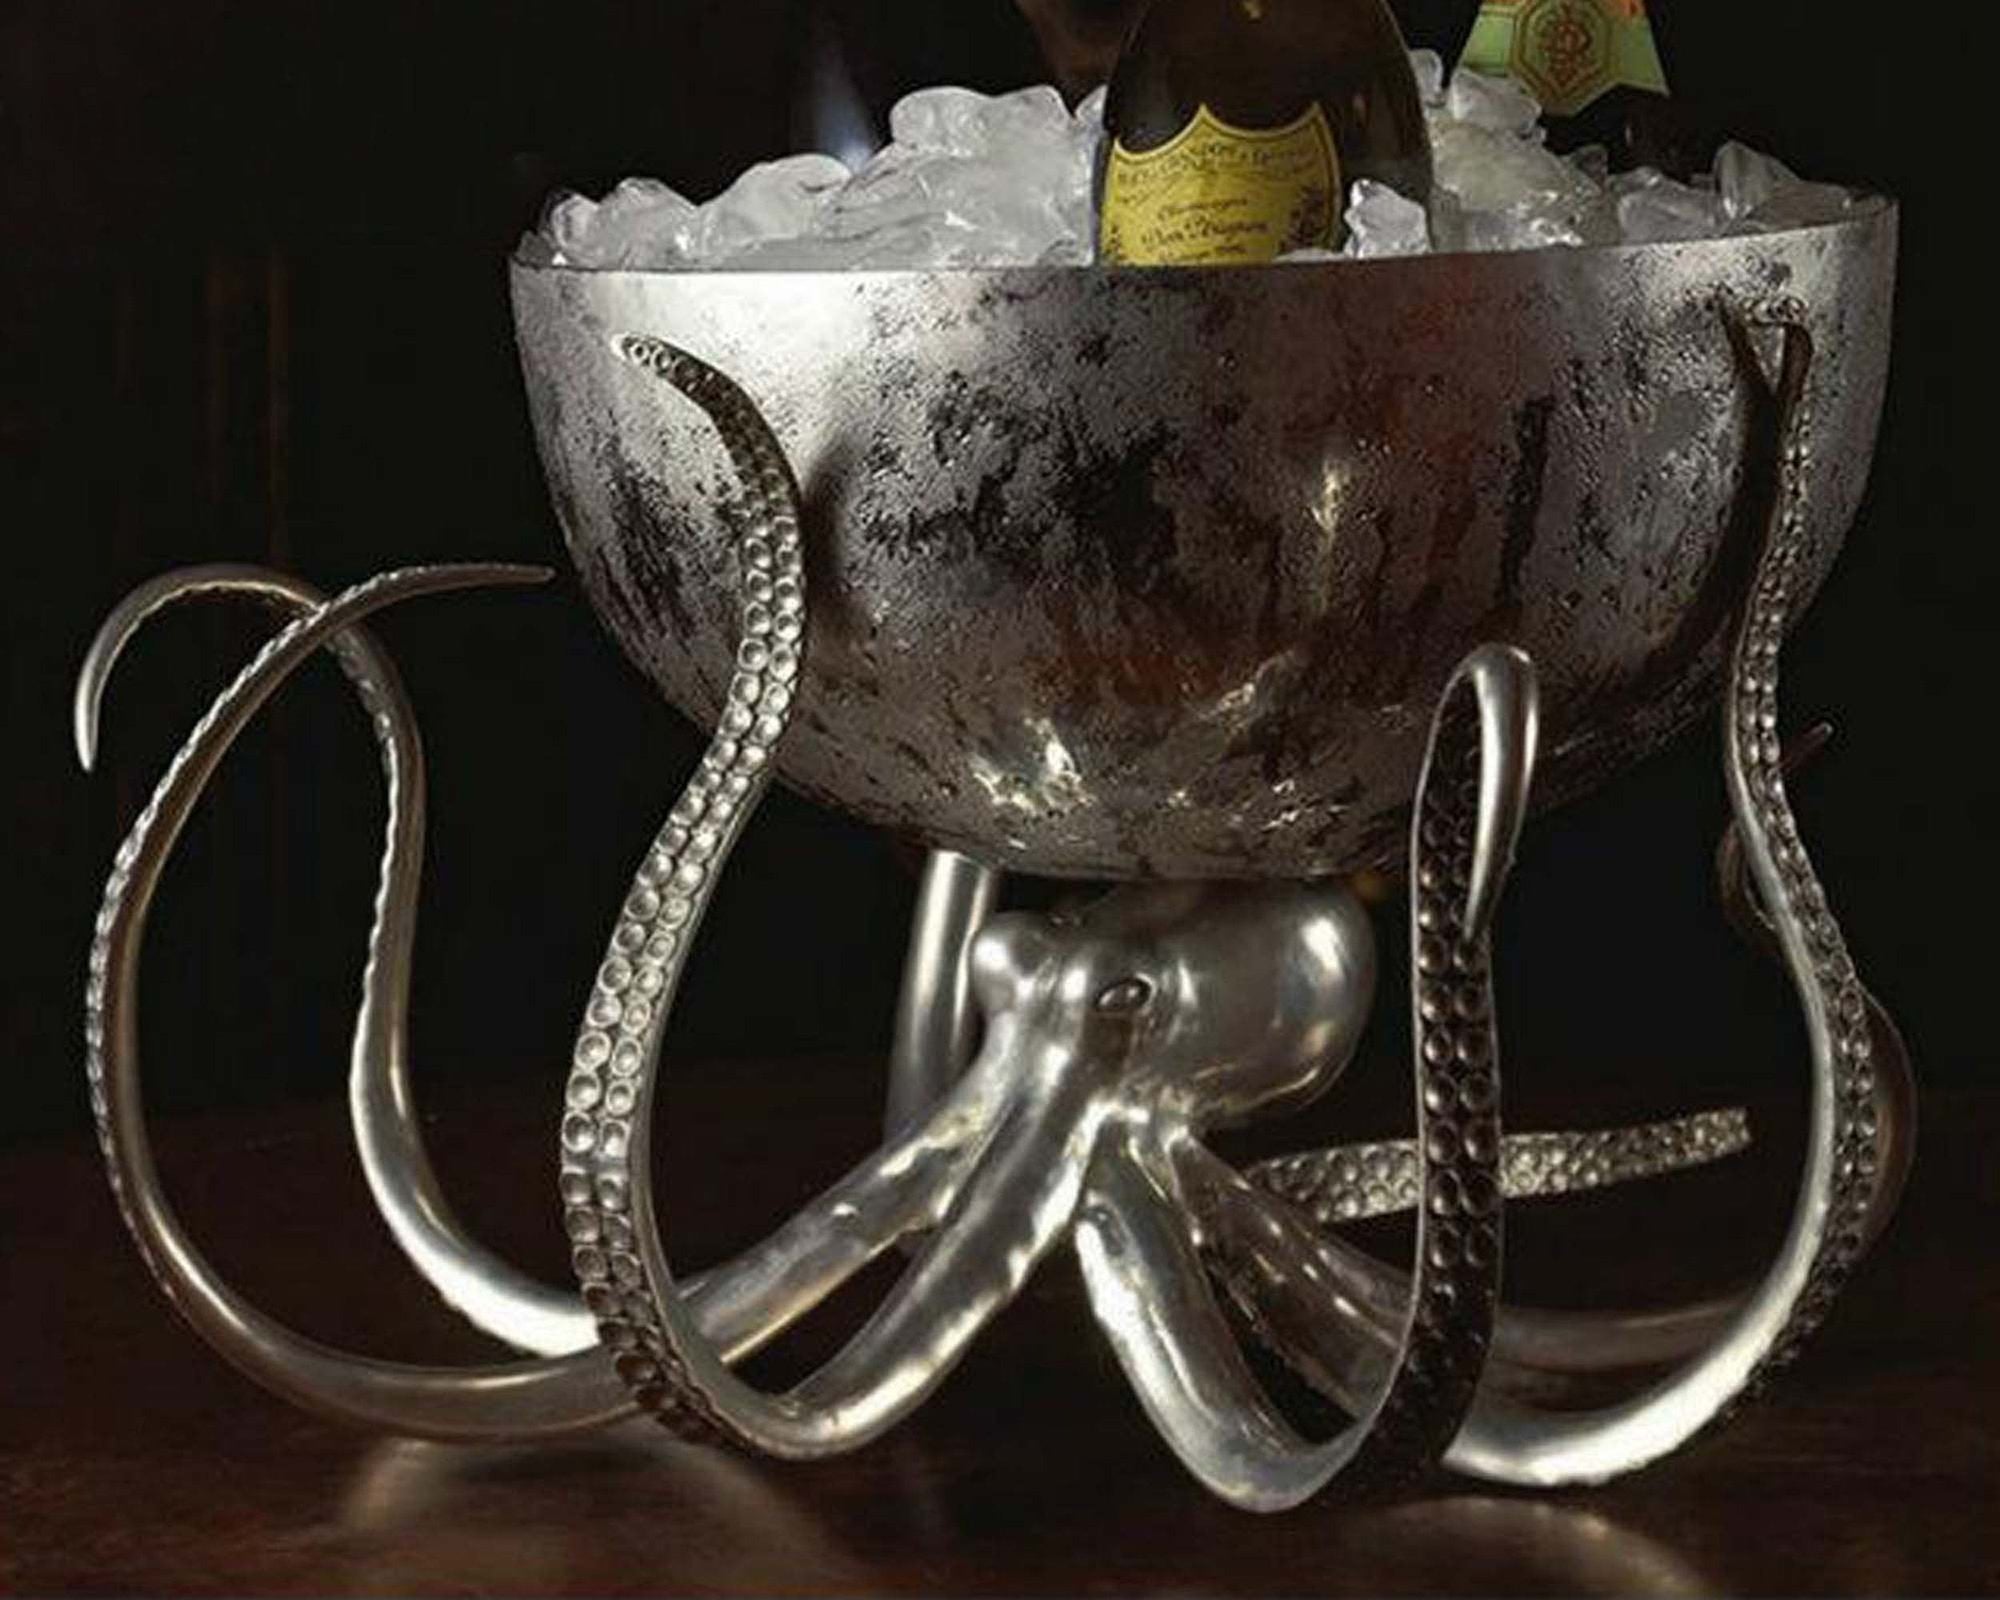 Majestic Octopus Kraken Pewter and Steel Punchbowl- Orchid Container |Timothy De Clue Collection 